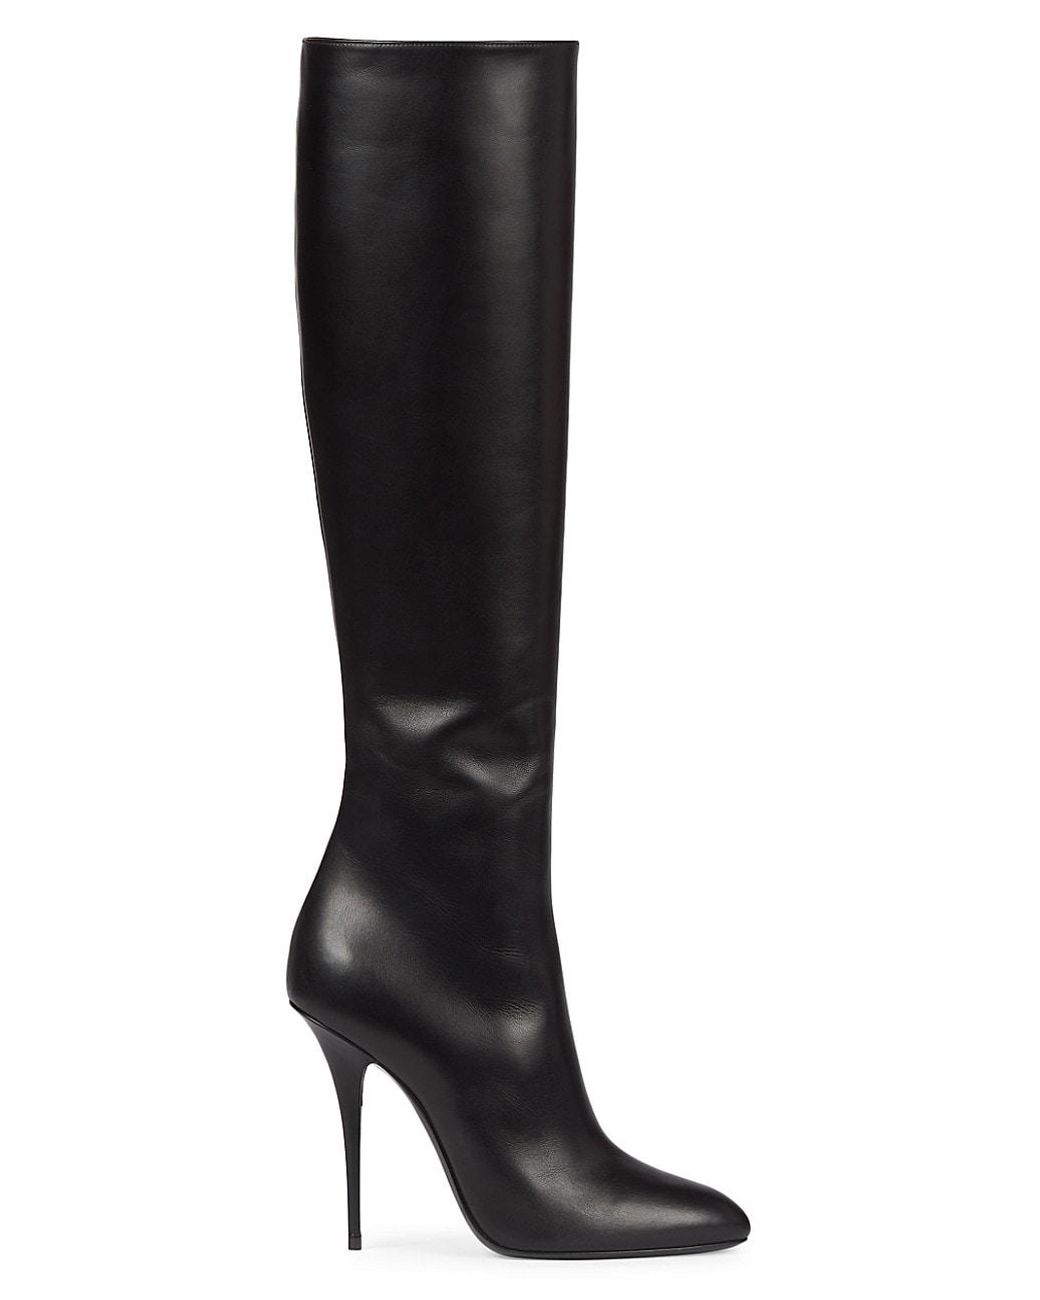 Saint Laurent Linda Leather Tall Boots in Black | Lyst